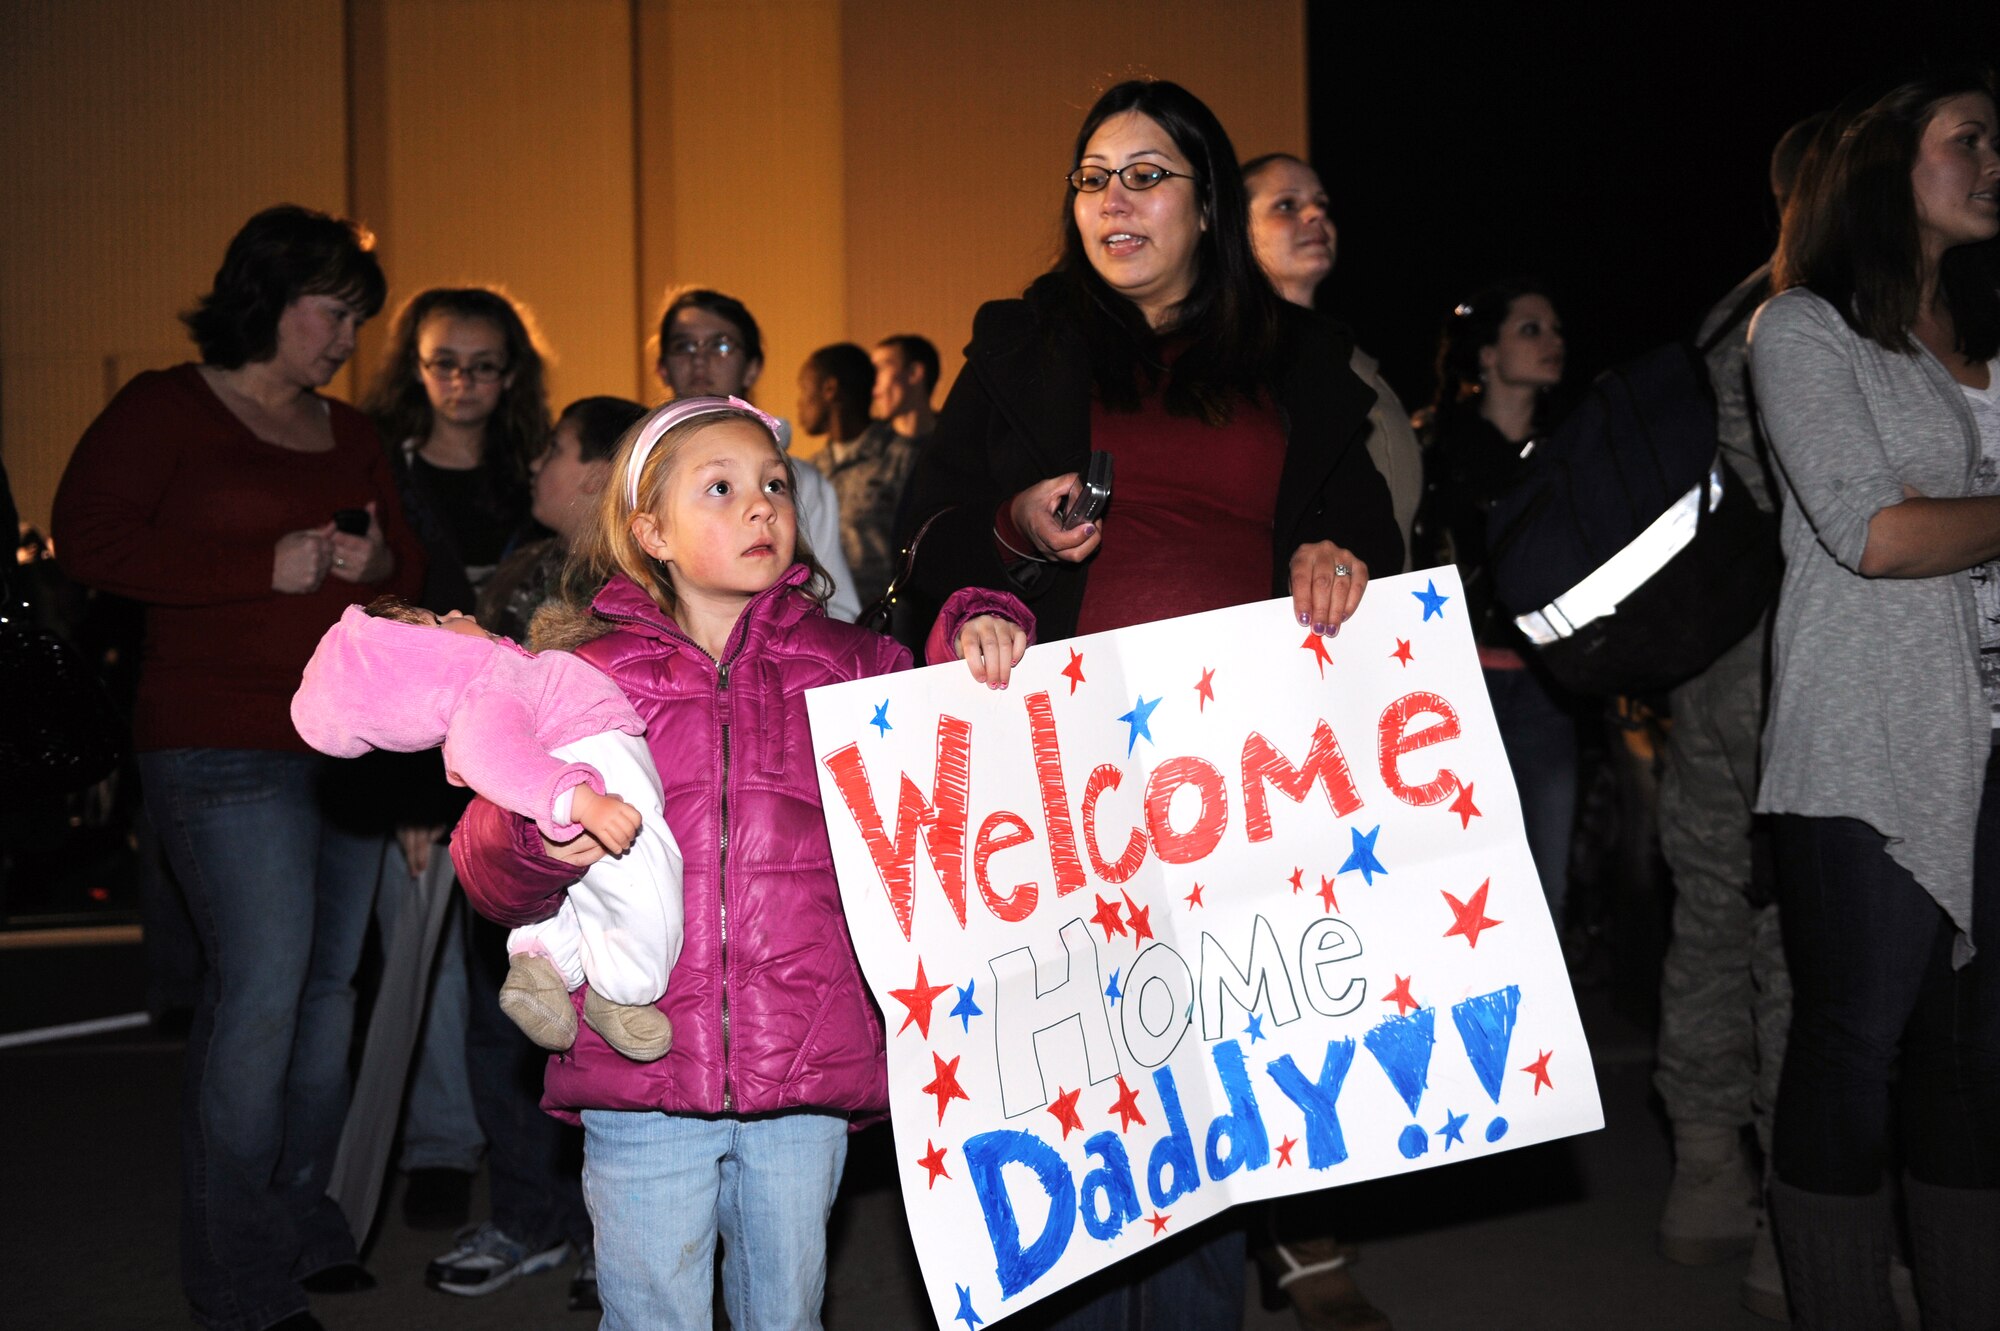 SHAW AIR FORCE BASE, S.C. -- Family members await the return of Aimen assigned to the 20th Fighter Wing. Hundreds of Airmen returned this week after a four-month deployment in support of NATO efforts in Afghanistan.  (U.S. Air Force Photo/Tech. Sgt. Louis Rivers)